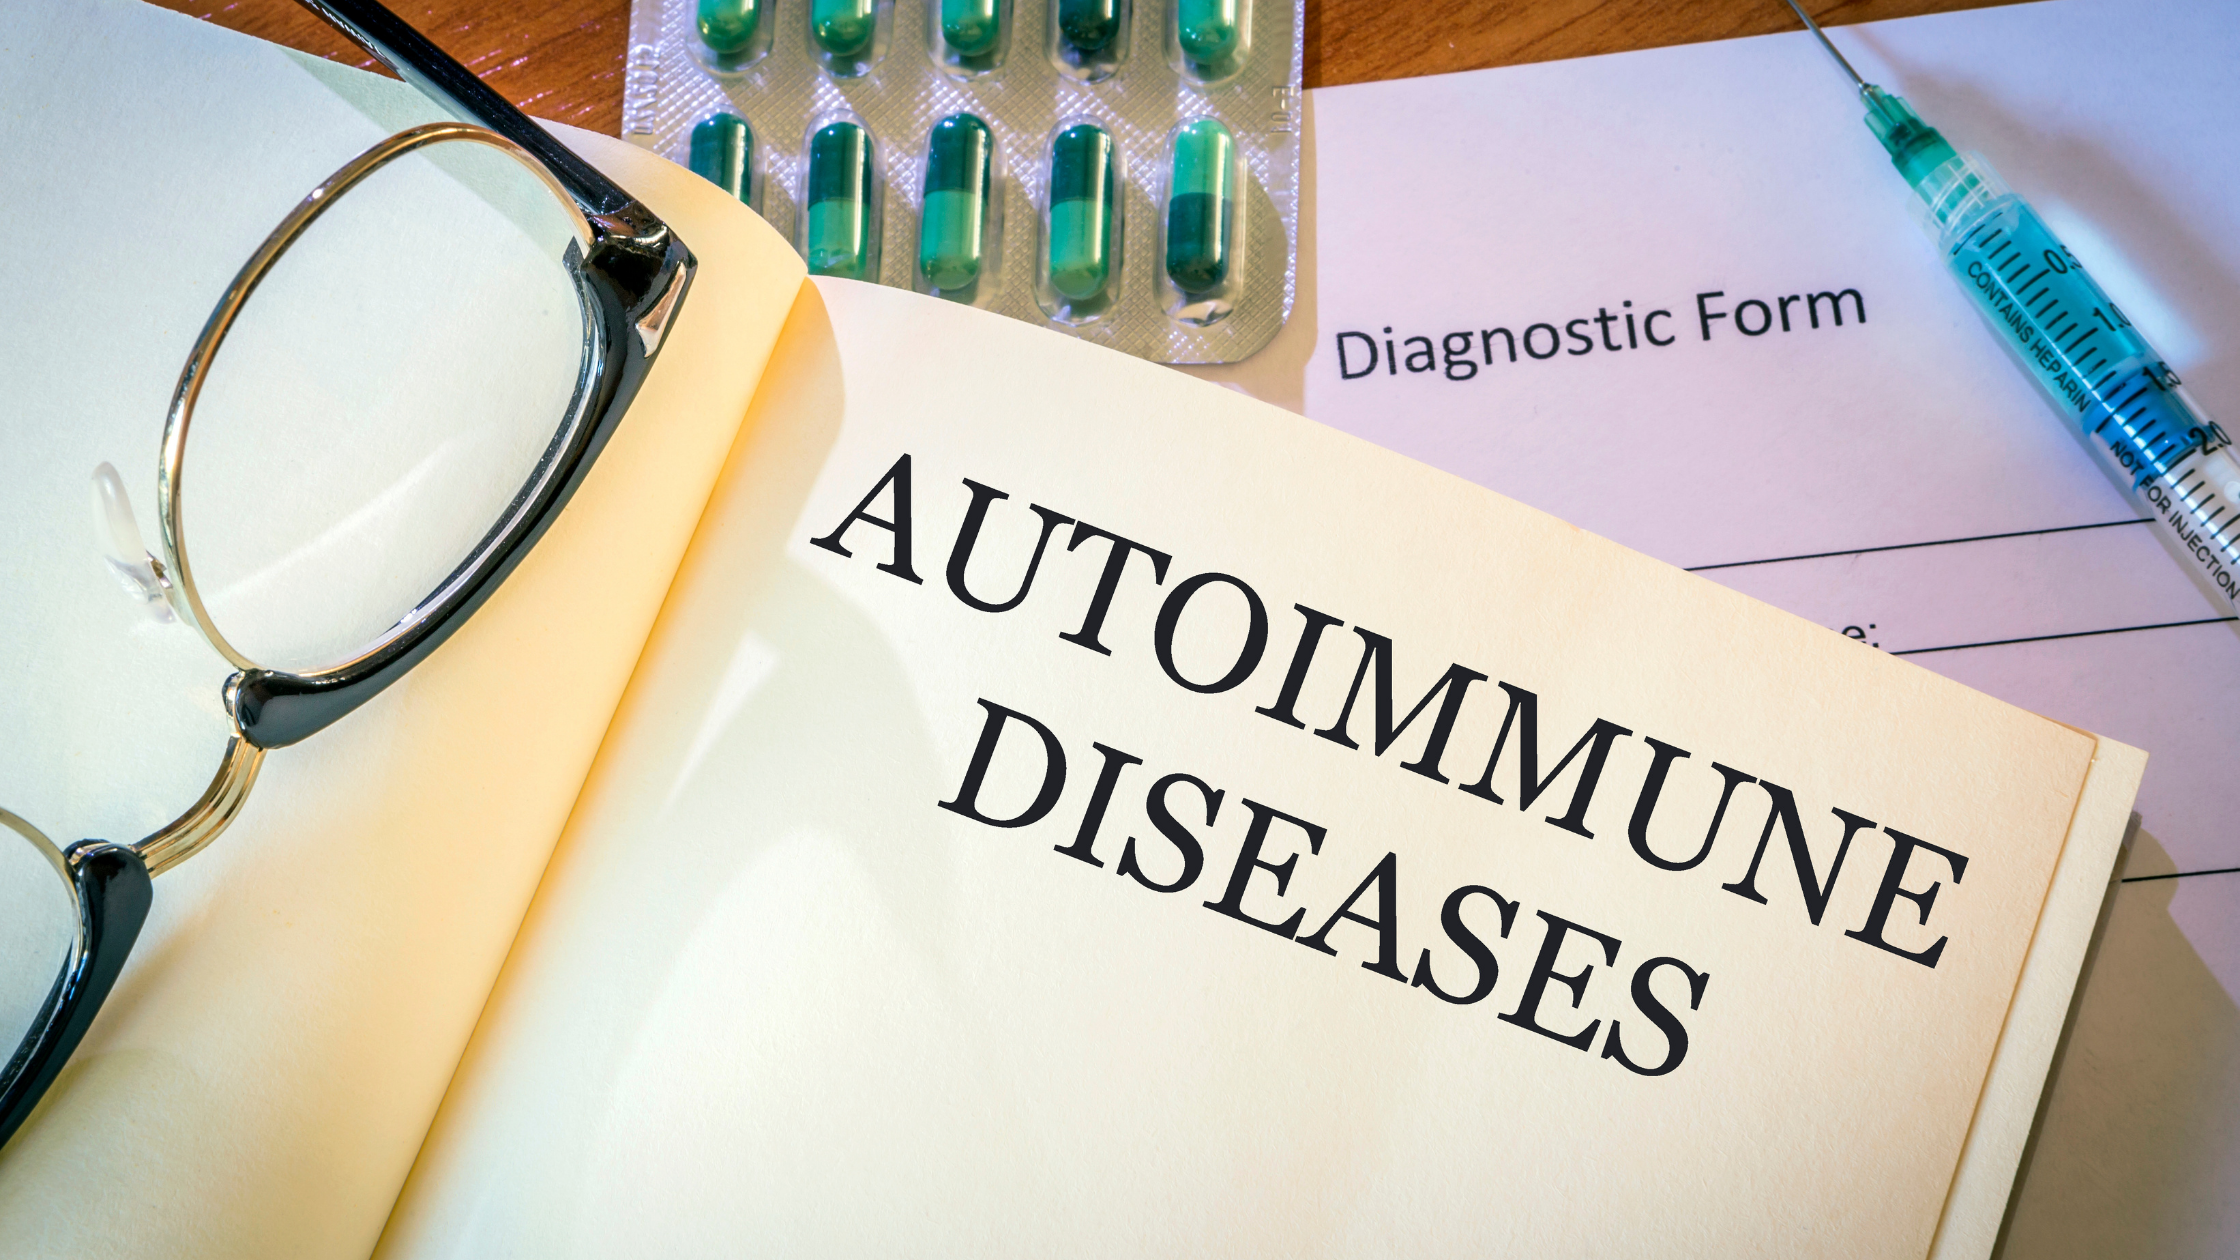 Book with the words "Autoimmune Disease"